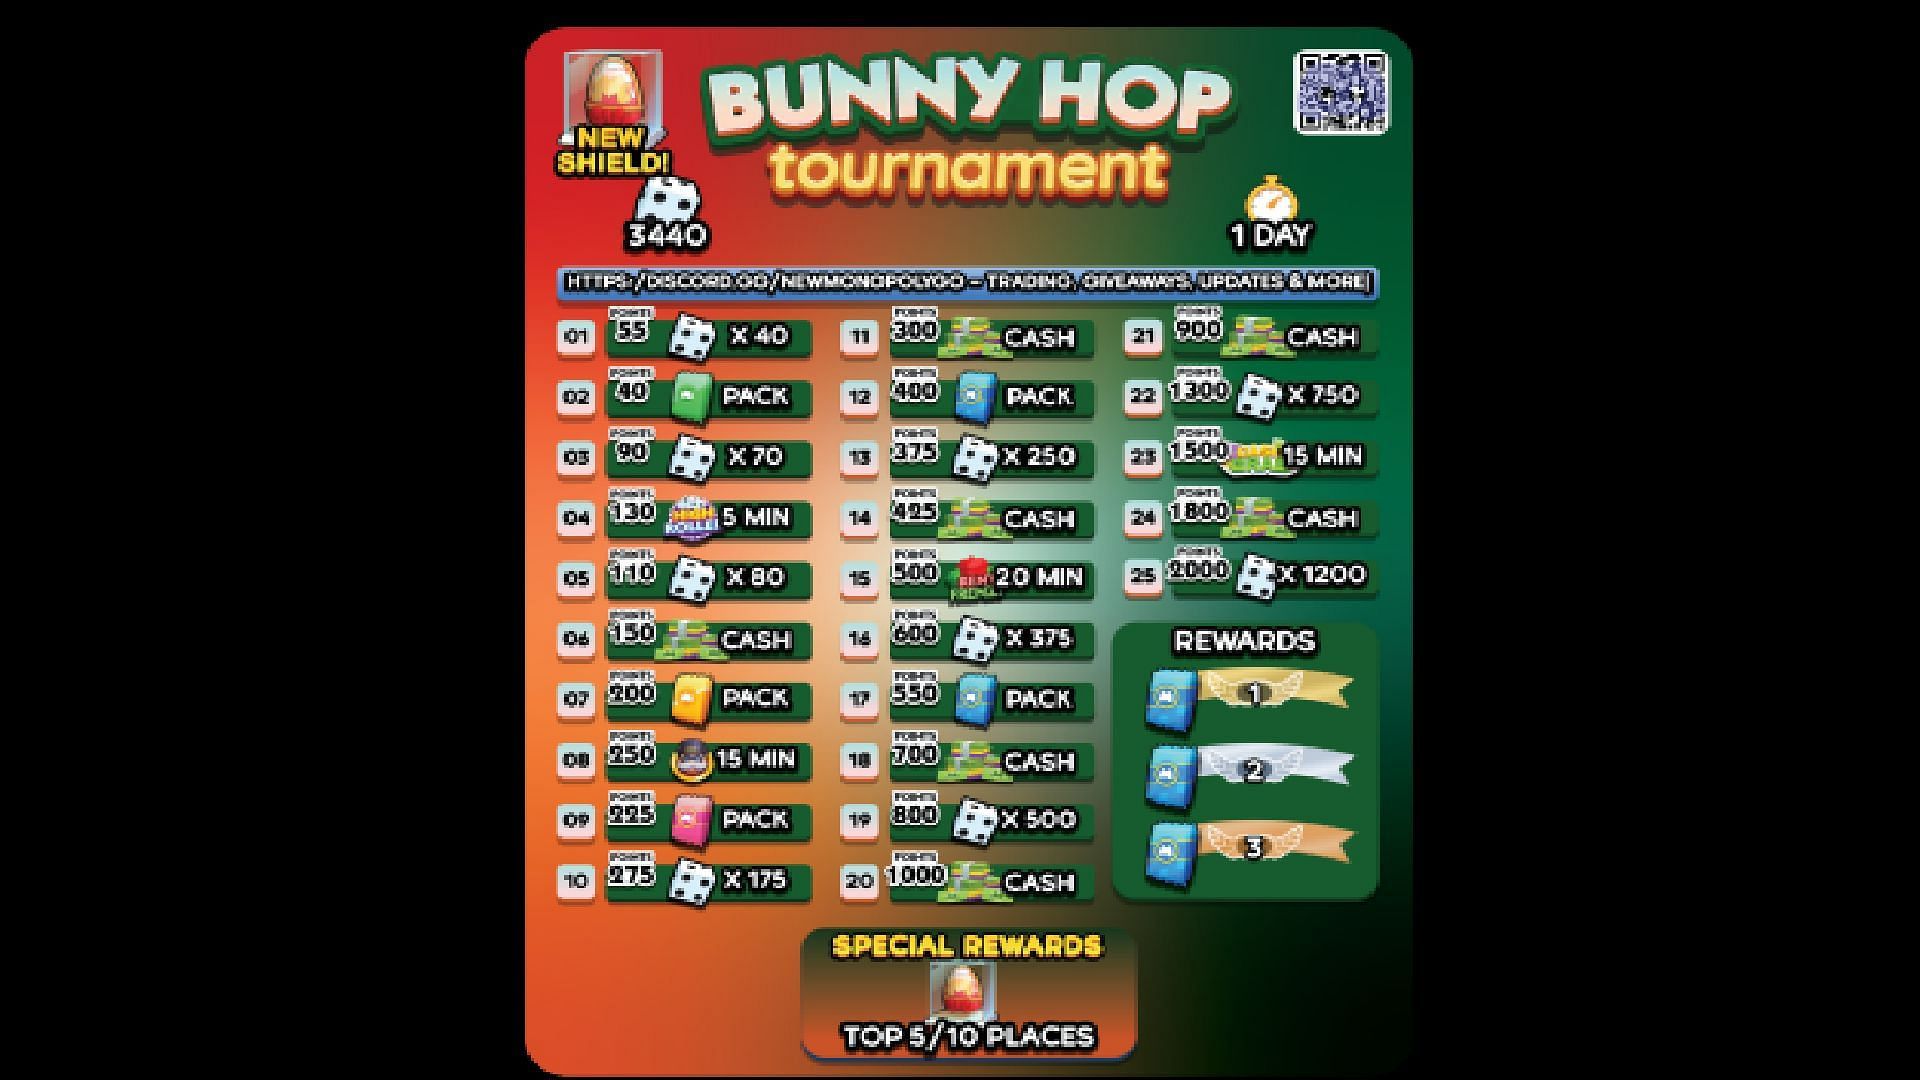 All rewards of the Bunny Hop tournament in Monopoly Go (Image via Discord/Swish)